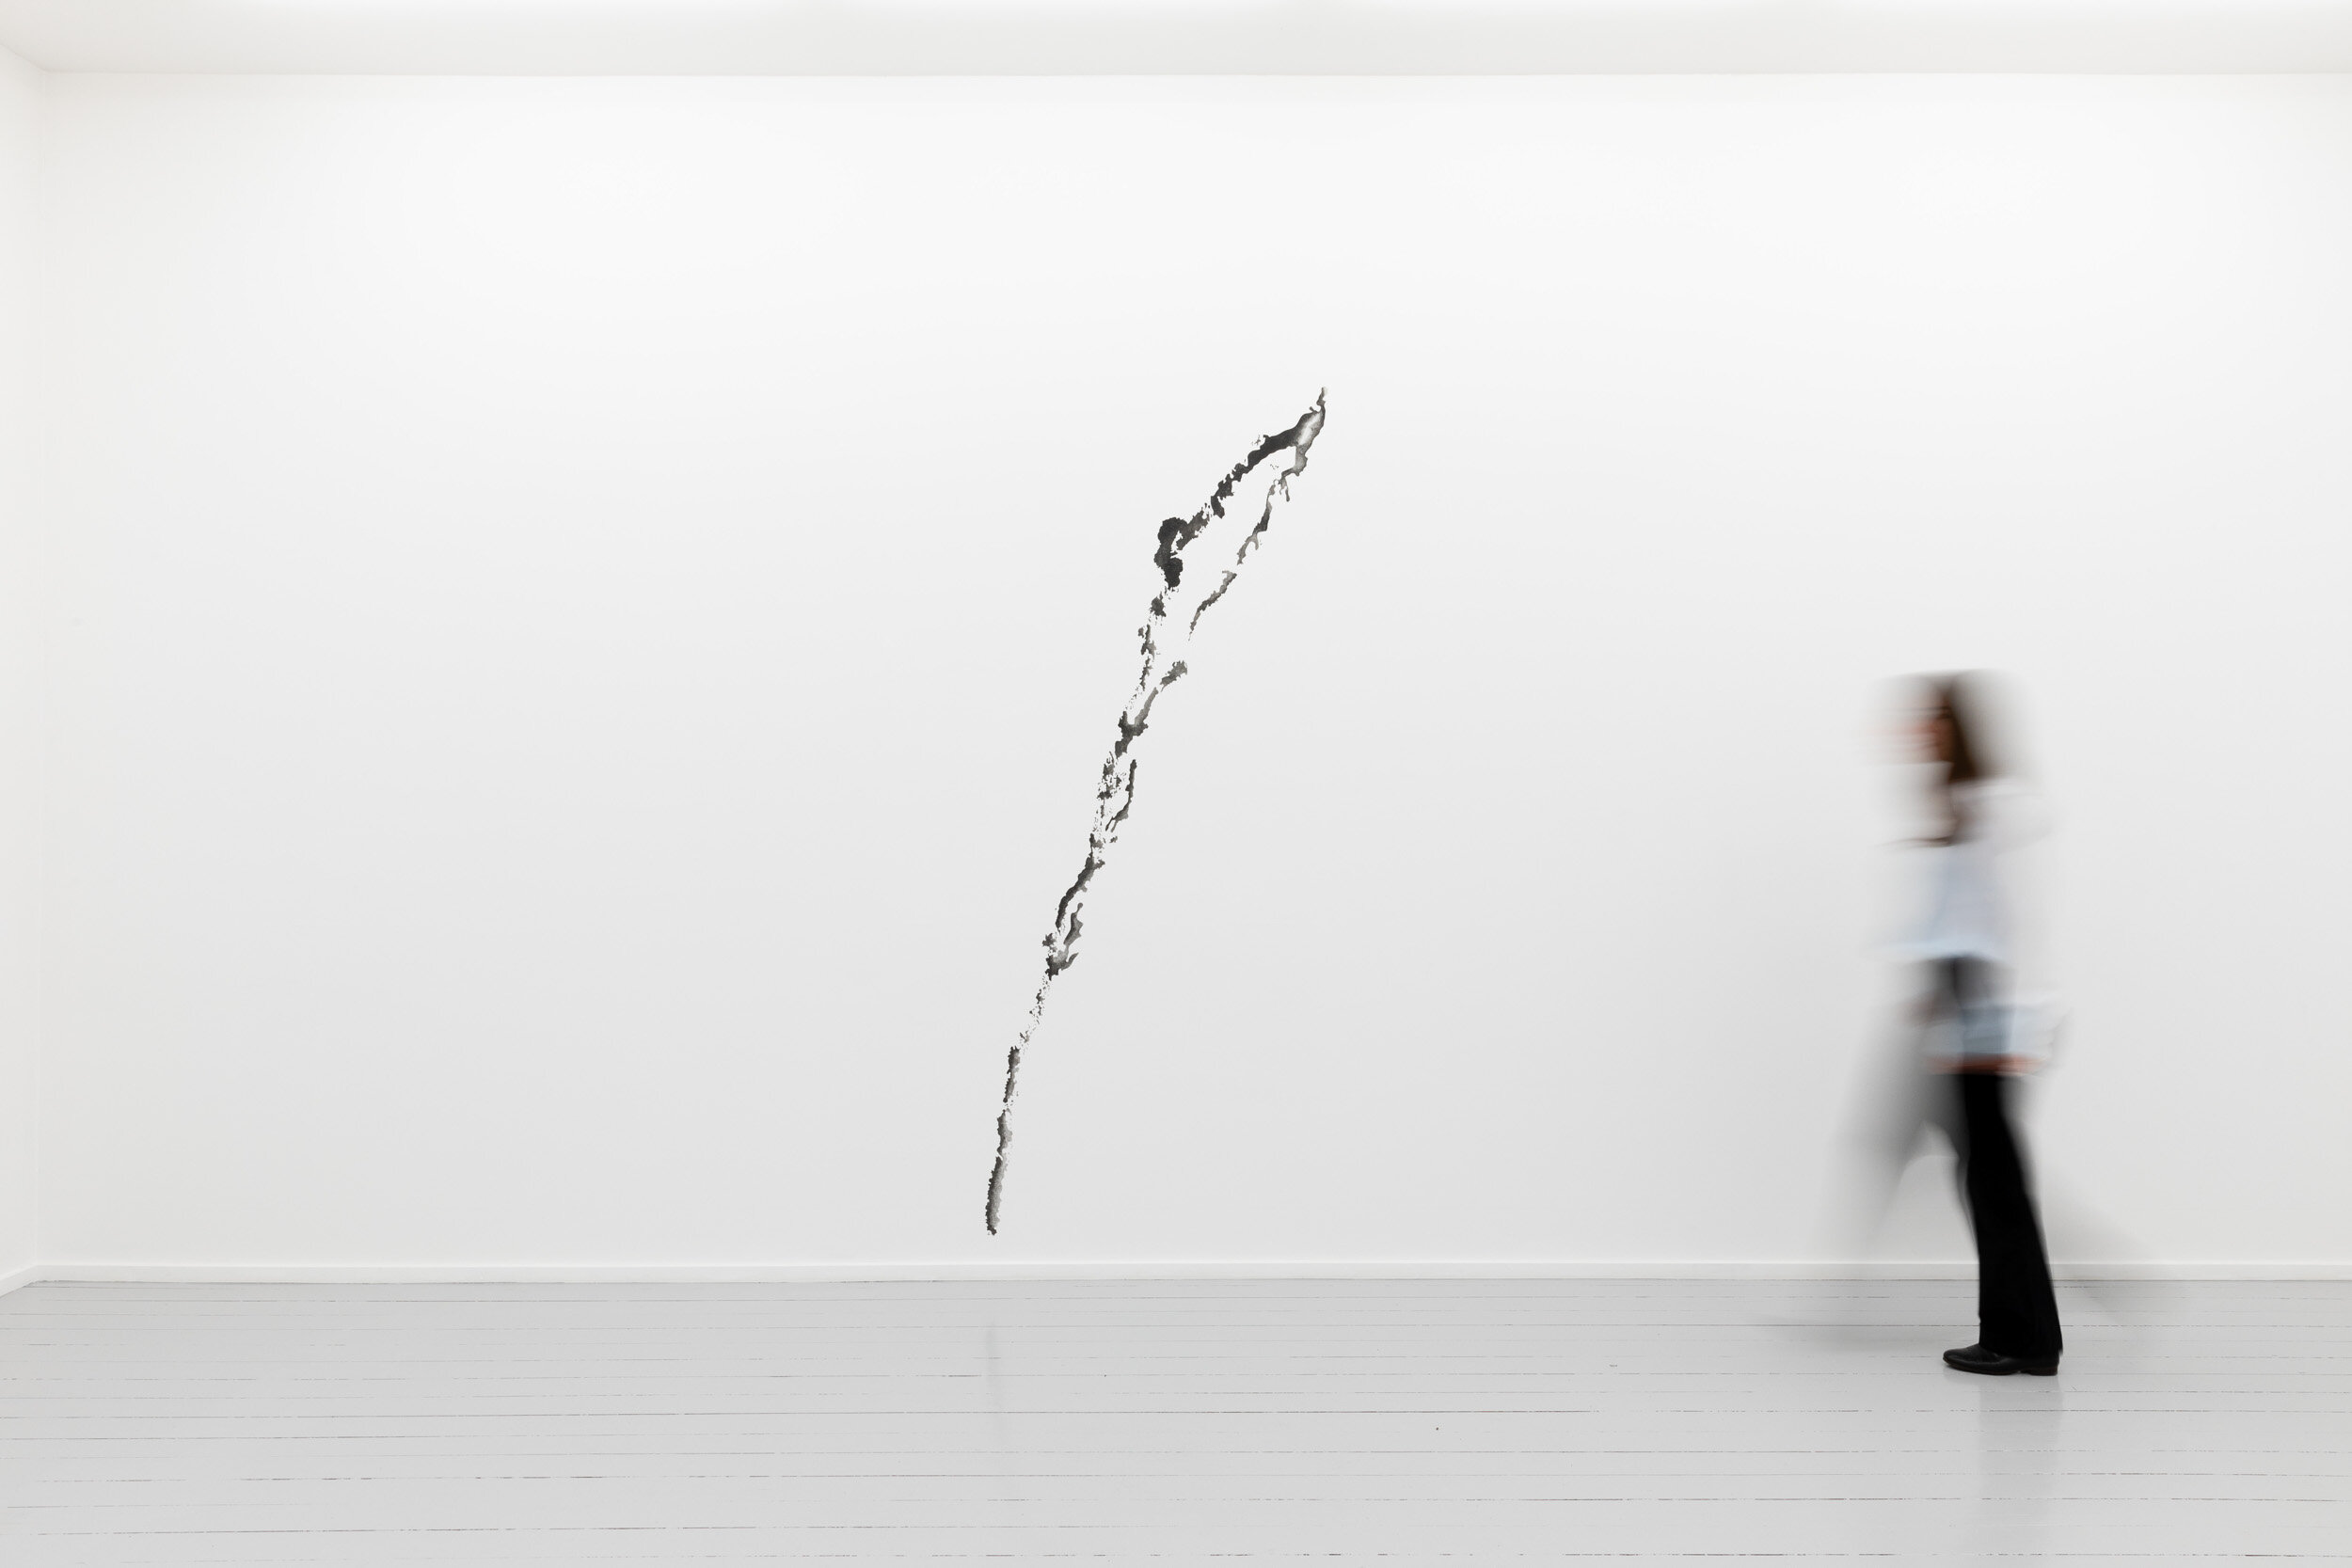  Wall Drawing for Galleri Riis III, 2019, Crayon on wall, H 334 x W 707 cm. Unique. Installation view Jan Groth ‘Signs and Figures’, Galleri Riis, Oslo 2019. Photo: Adrian Bugge 